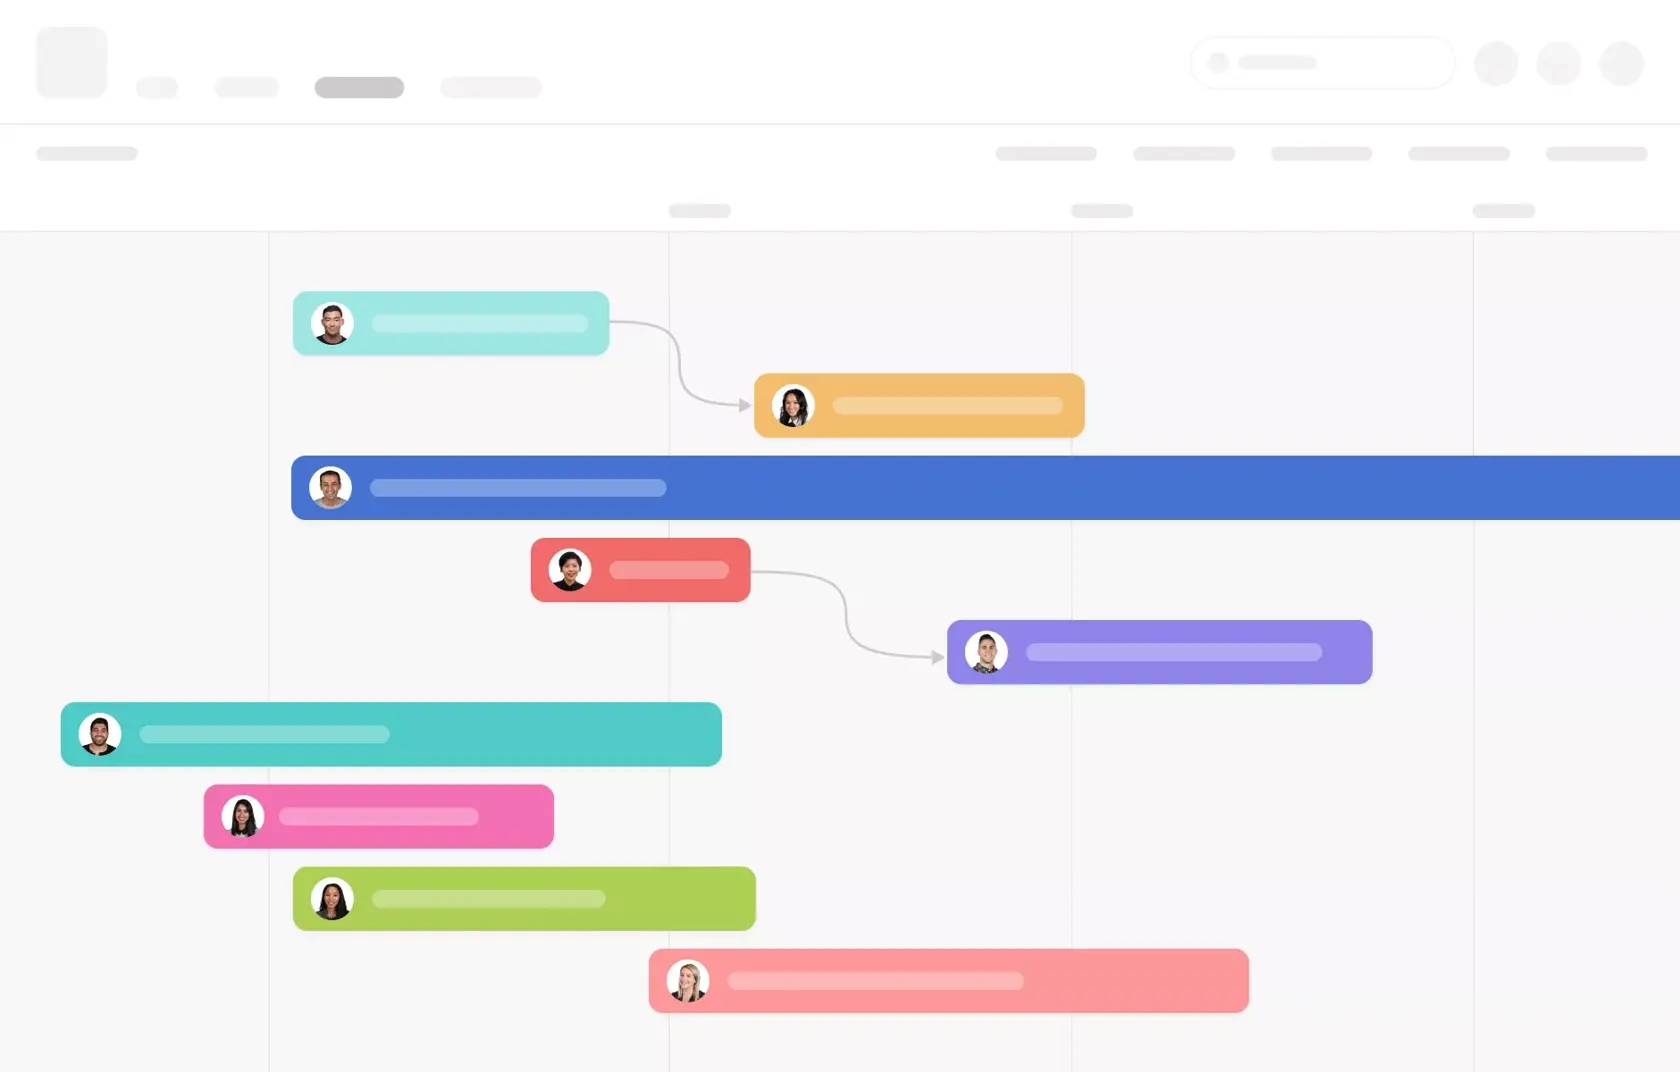 [Product UI] Example project timeline layout with abstracted UI (Timeline)